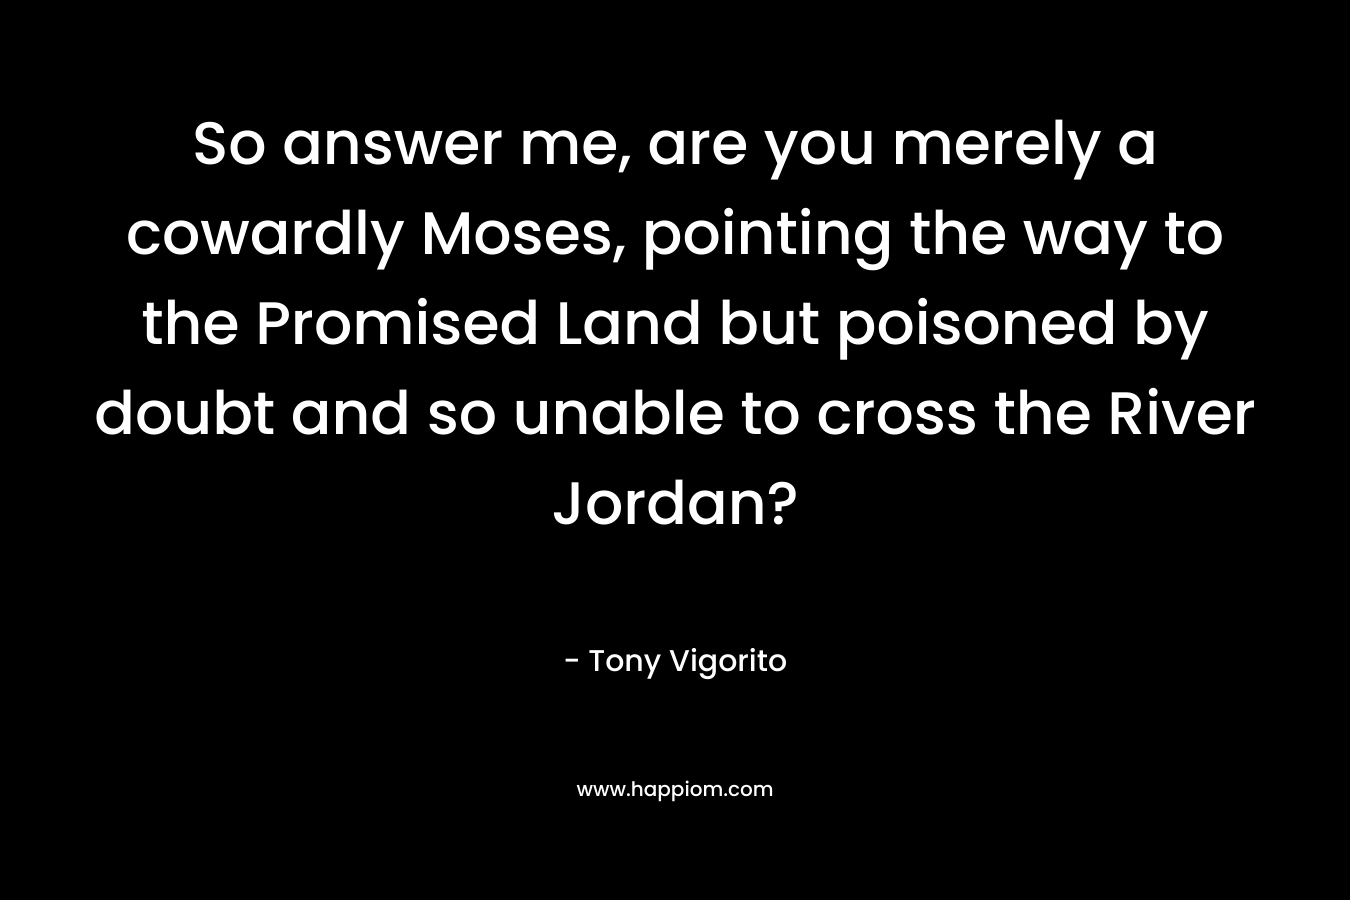 So answer me, are you merely a cowardly Moses, pointing the way to the Promised Land but poisoned by doubt and so unable to cross the River Jordan? – Tony Vigorito